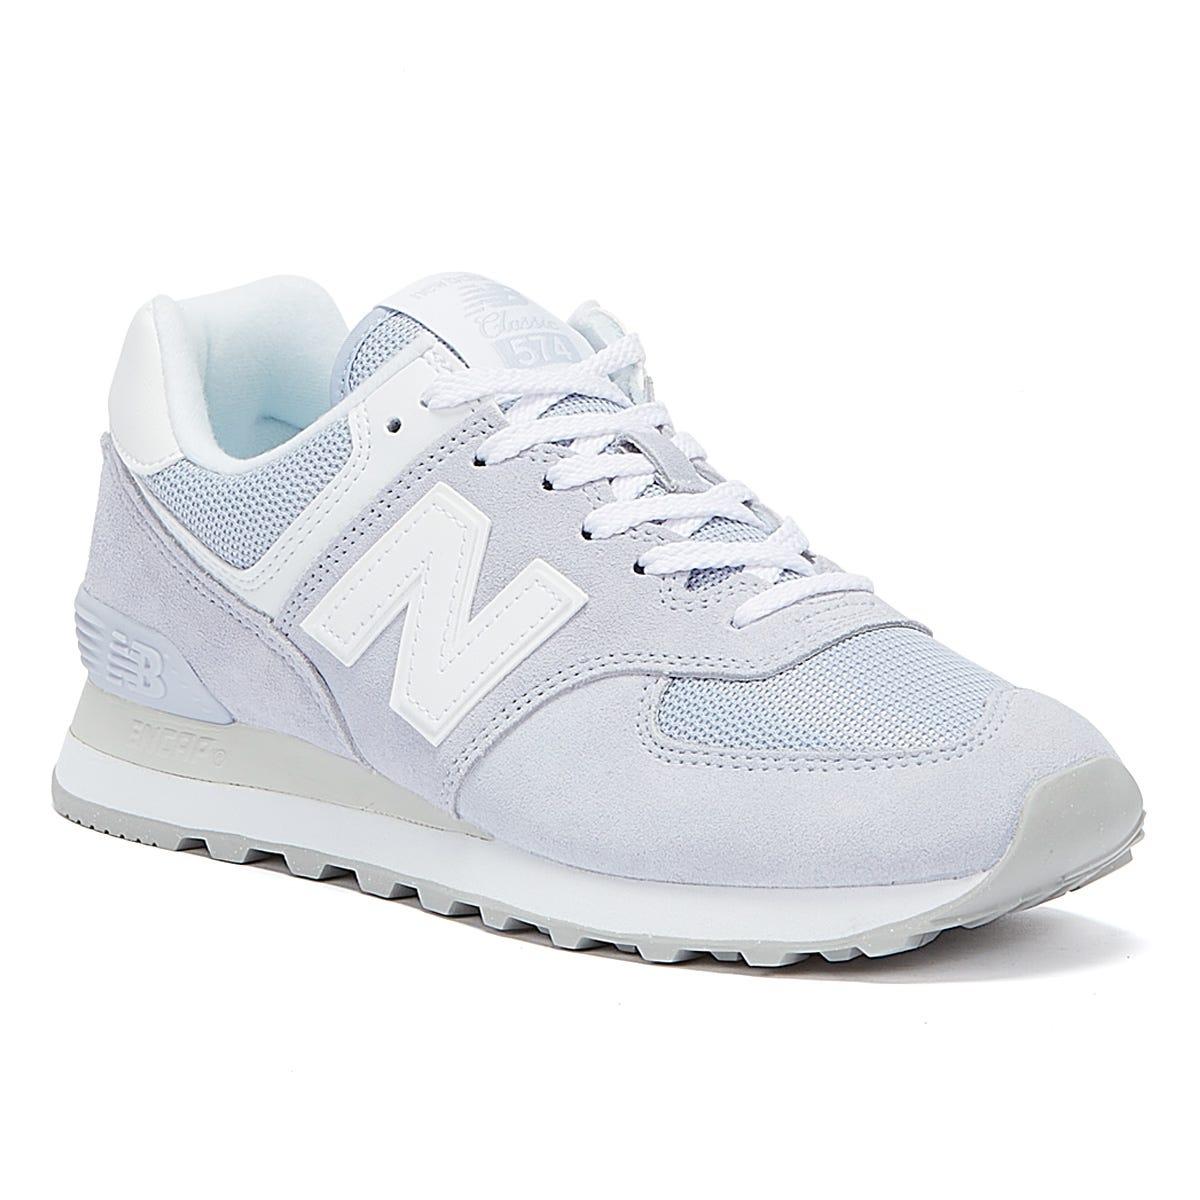 New Balance 574 Violet Haze Trainers in Purple | Lyst